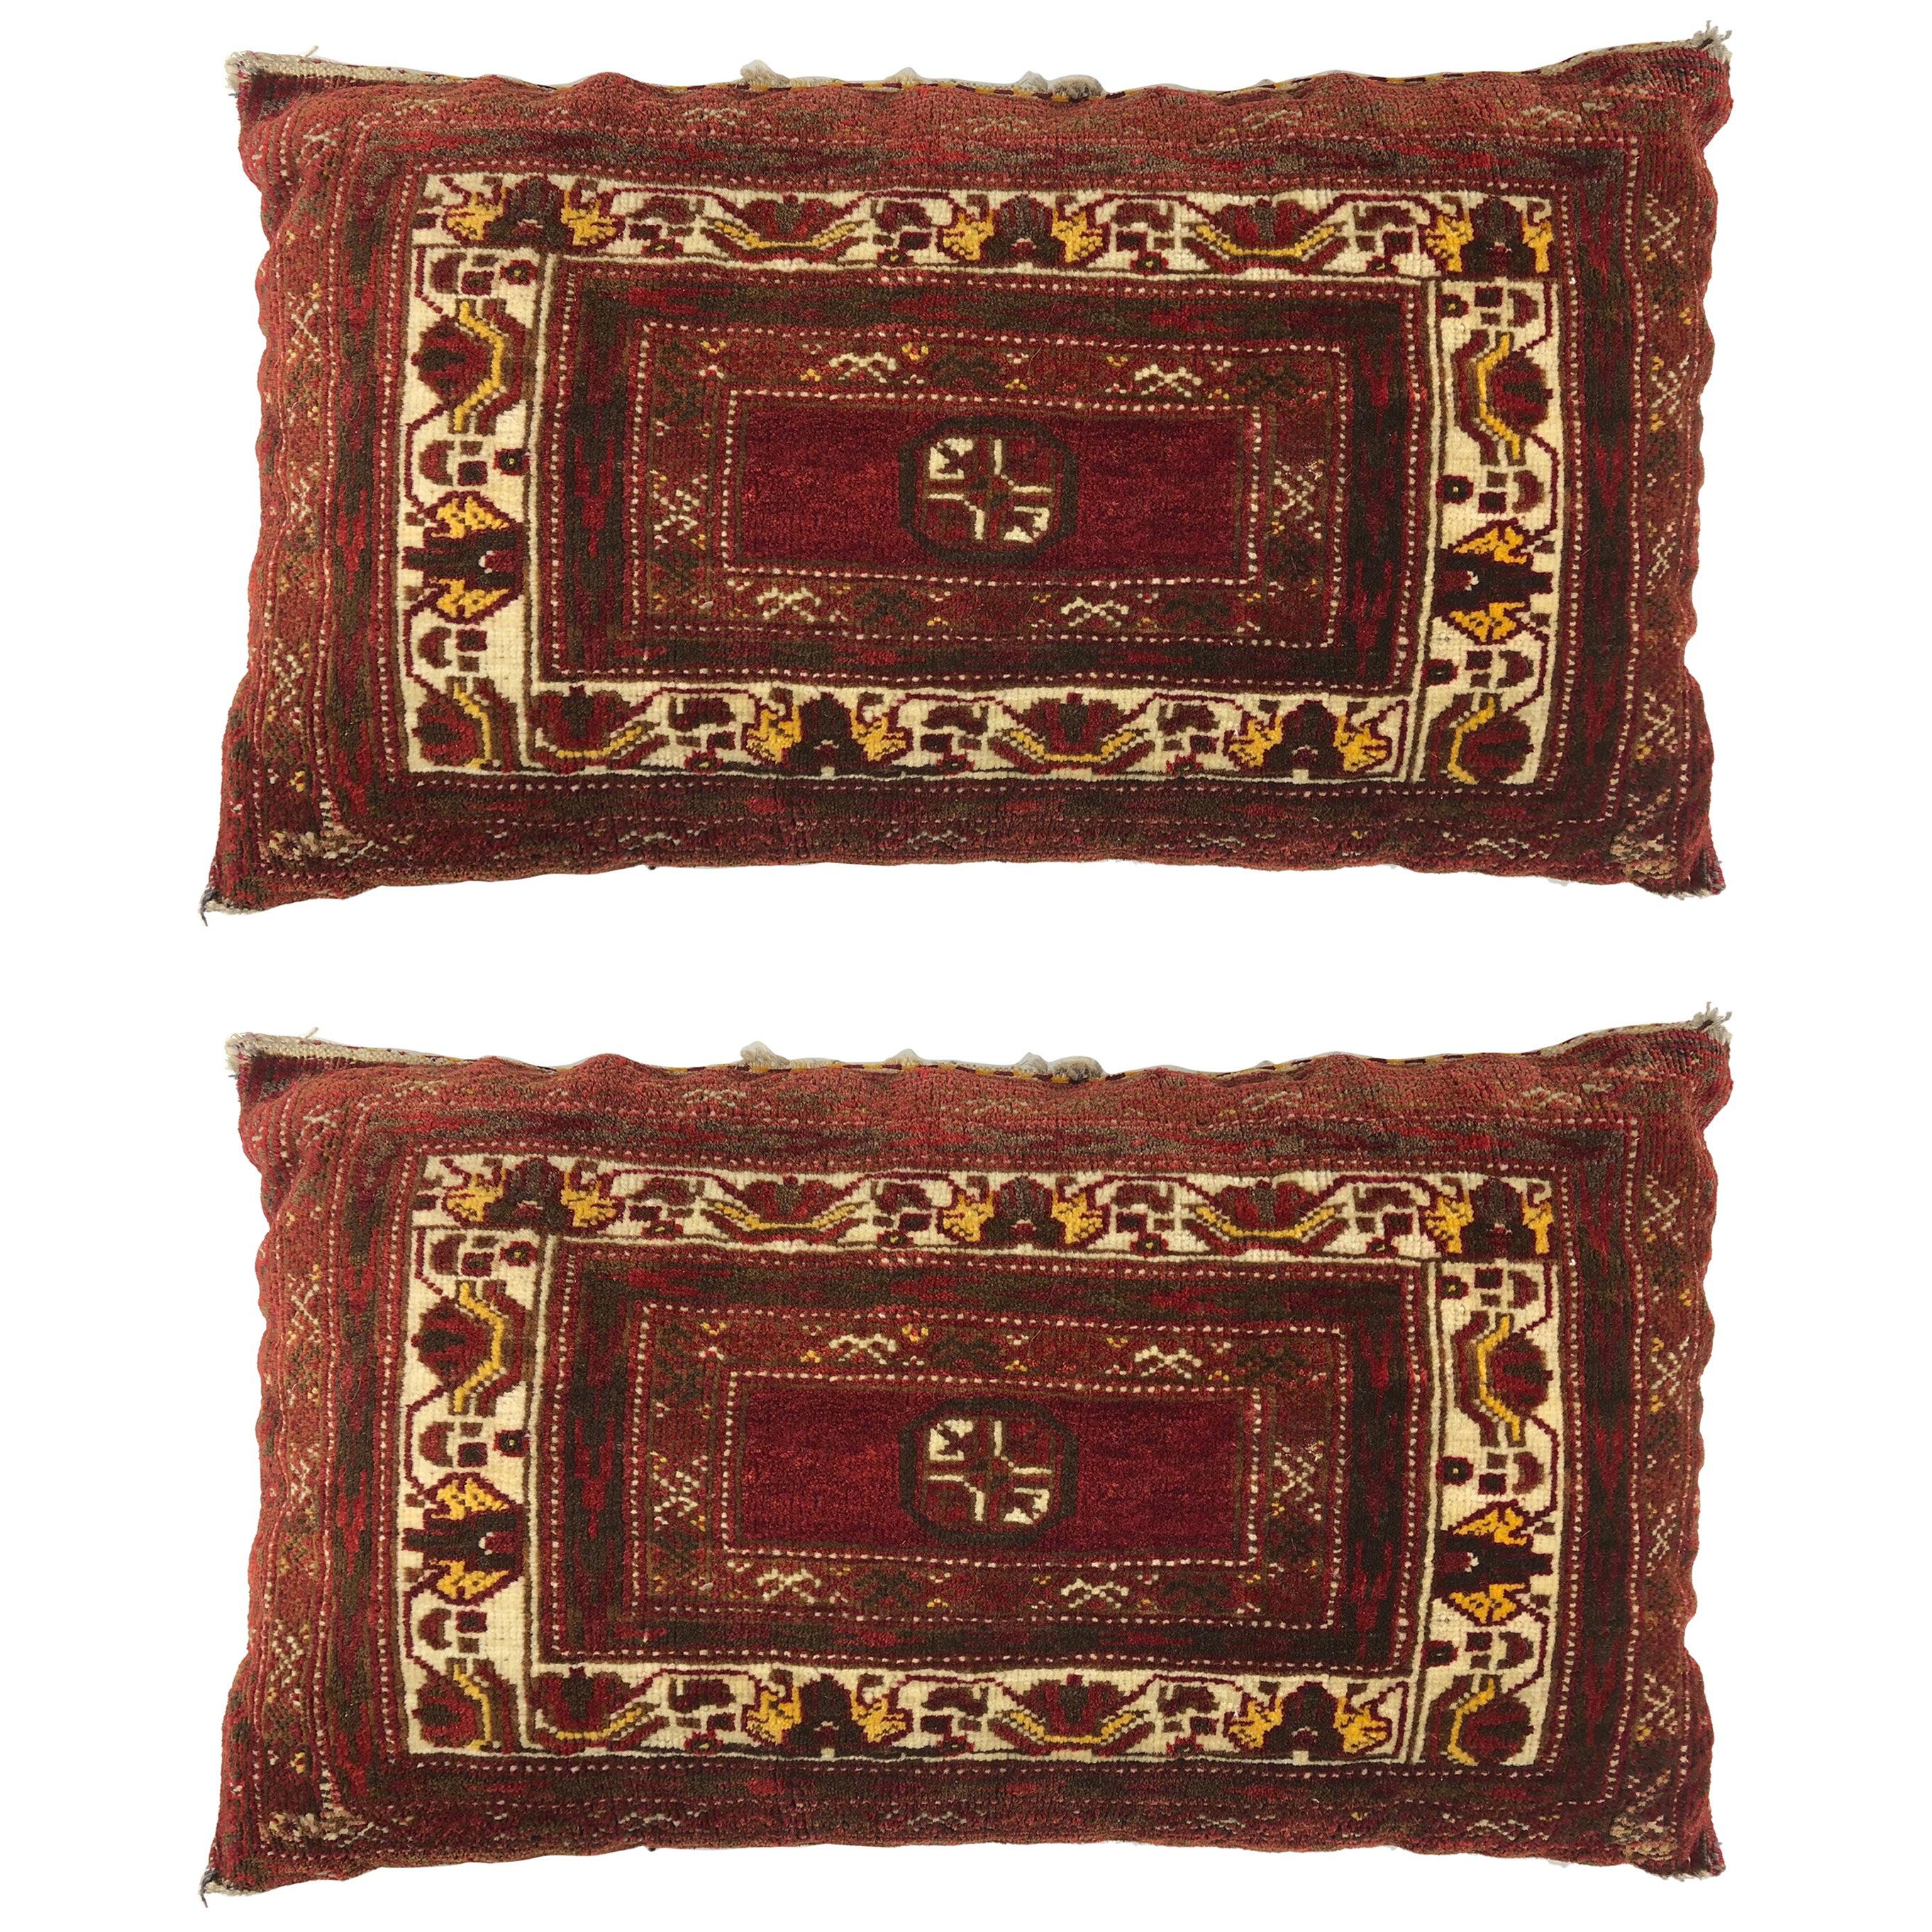 Pair of Antique Pillows Made From Vintage Rug Fragment